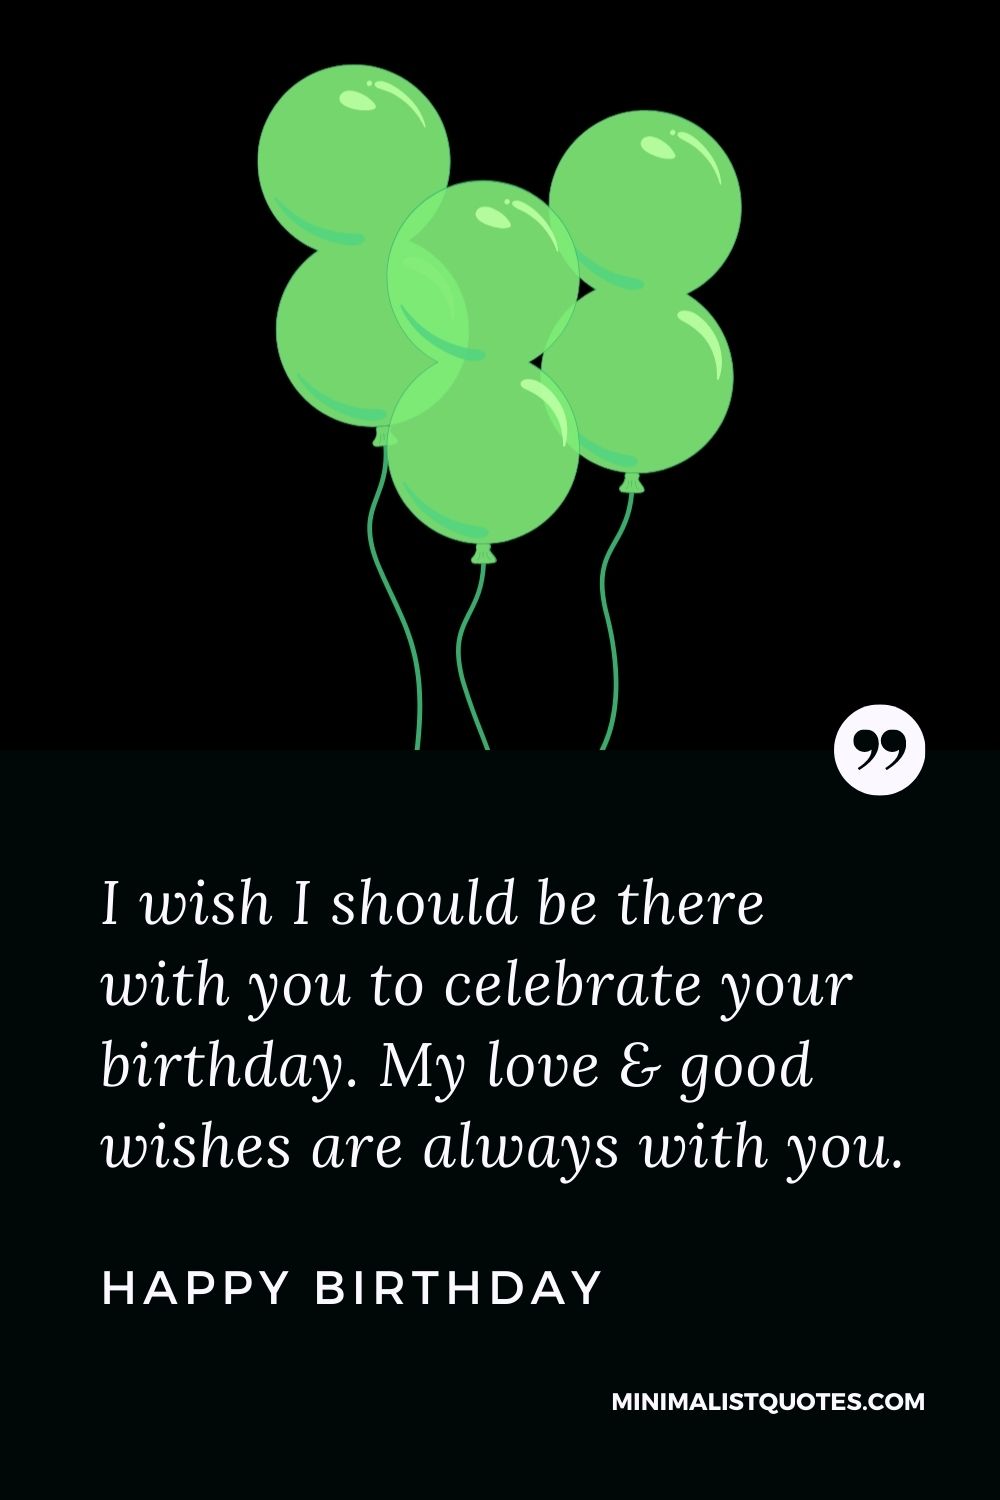 Birthday Wish, Quote & Message with Image: I wish I should be there with you to celebrate your birthday. My love & good wishes are always with you. Happy Birthday!